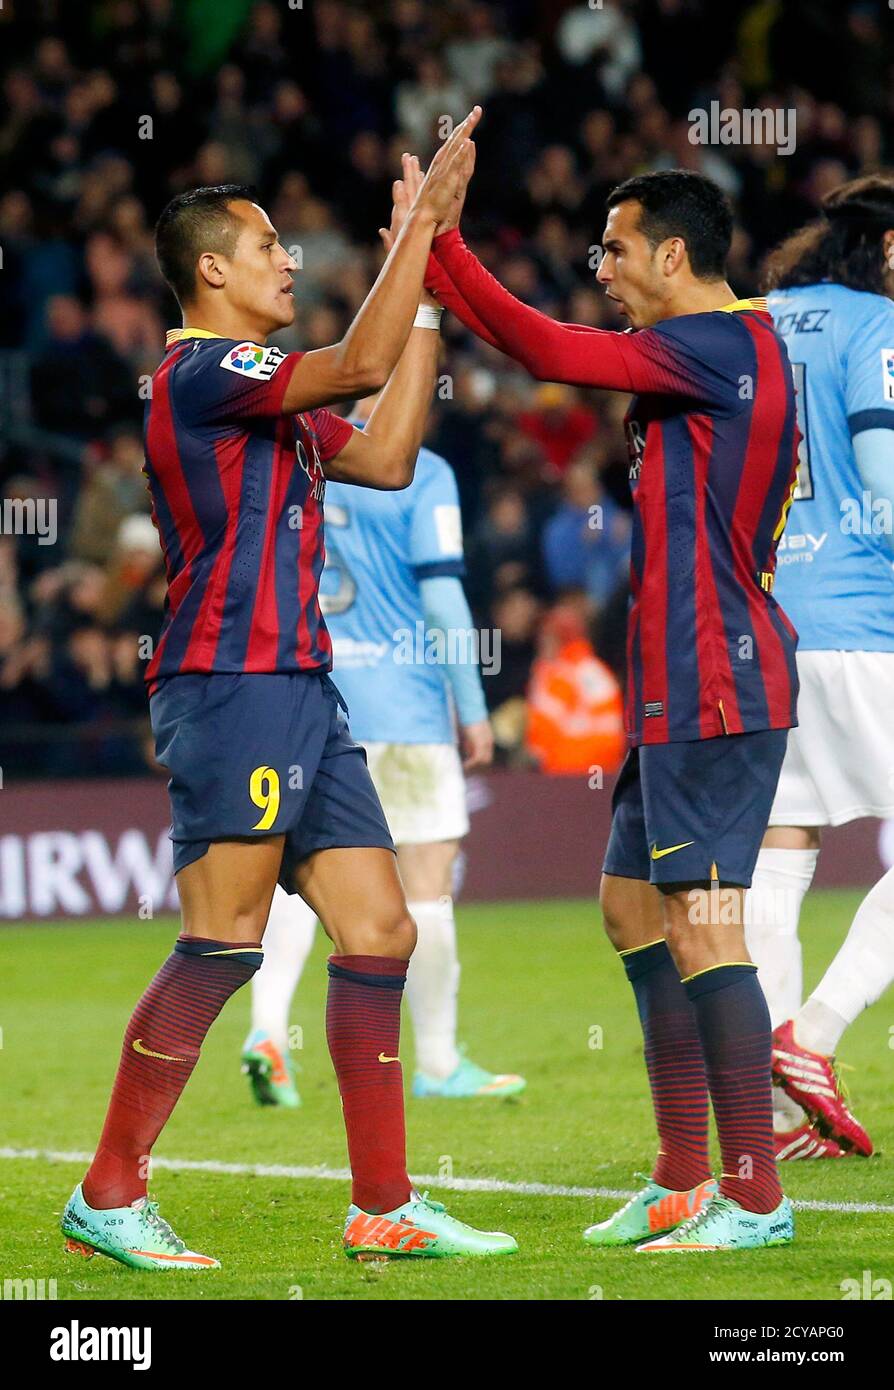 ¿Cuánto mide Alexis Sánchez? Barcelonas-alexis-sanchez-l-and-pedro-rodriguez-celebrate-a-goal-against-malaga-during-their-spanish-first-division-soccer-match-at-camp-nou-stadium-in-barcelona-january-26-2014-reuters-albert-gea-spain-tags-sport-soccer-2cyapg0